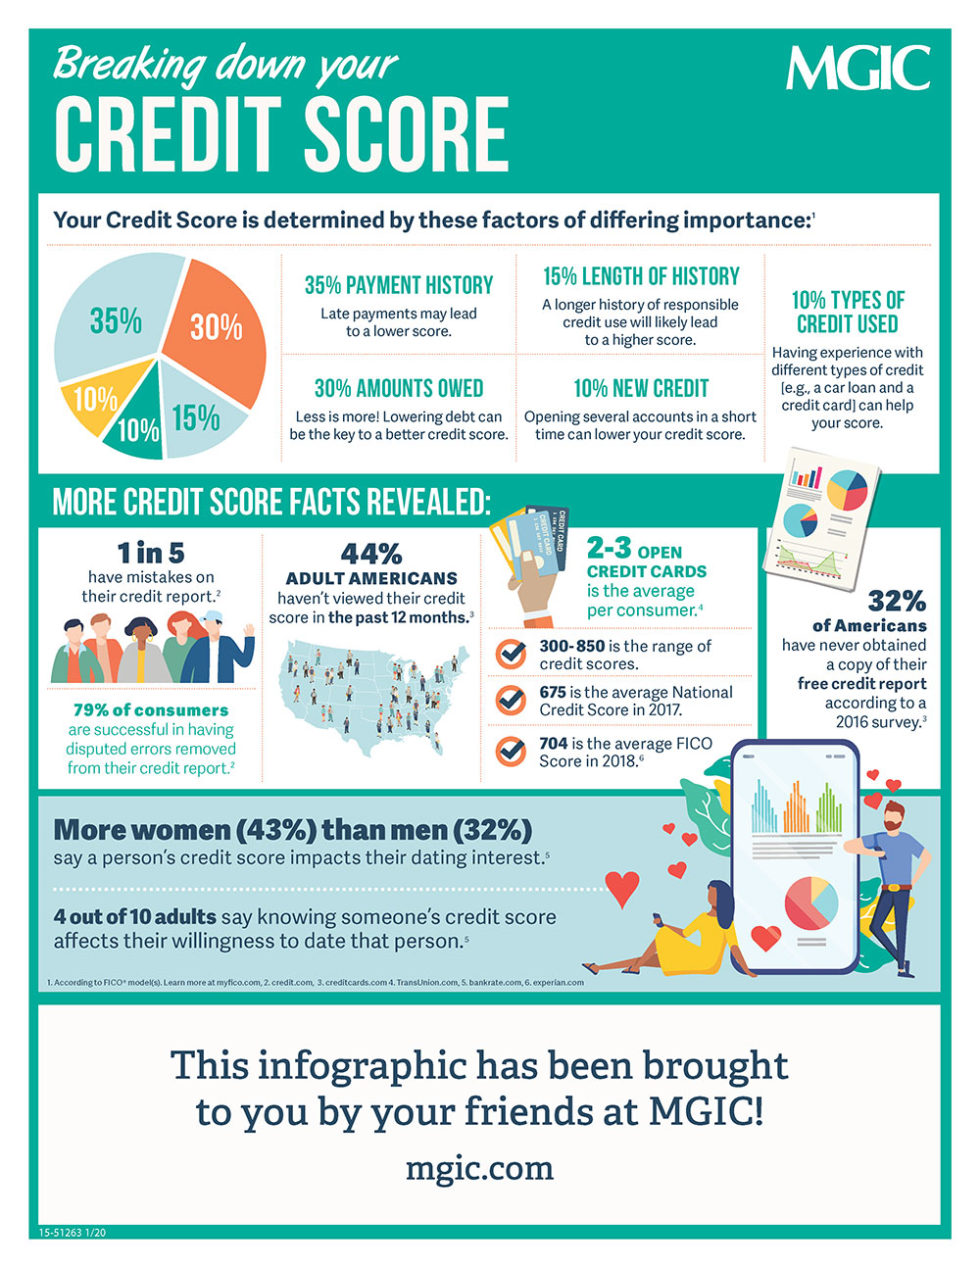 Breaking Down your Credit Score Infographic